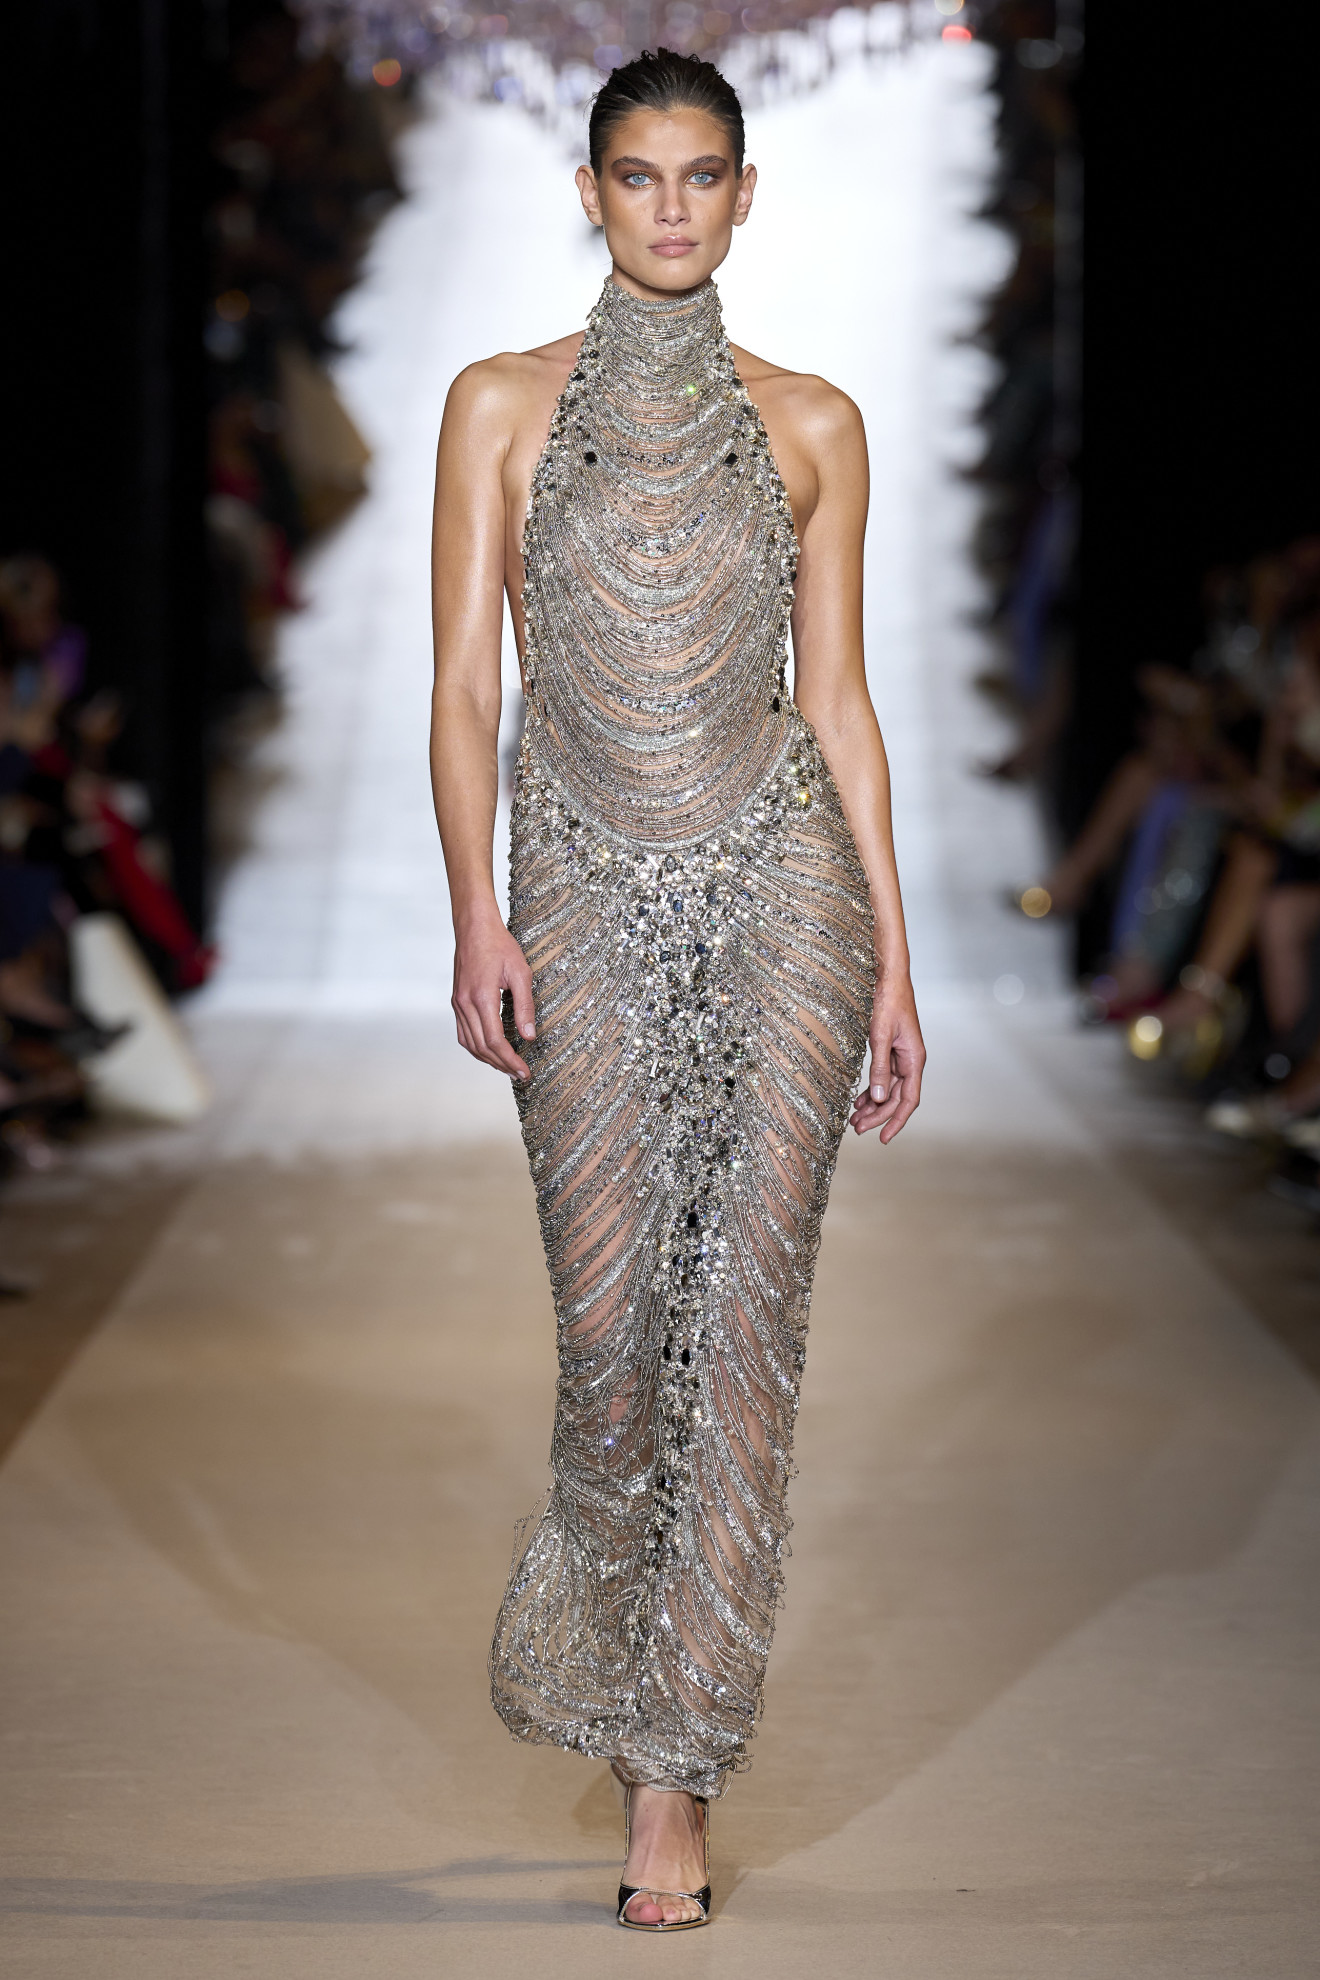 Zuhair Murad’s Couture Show Is a Good Way to Slink Into The Weekend ...